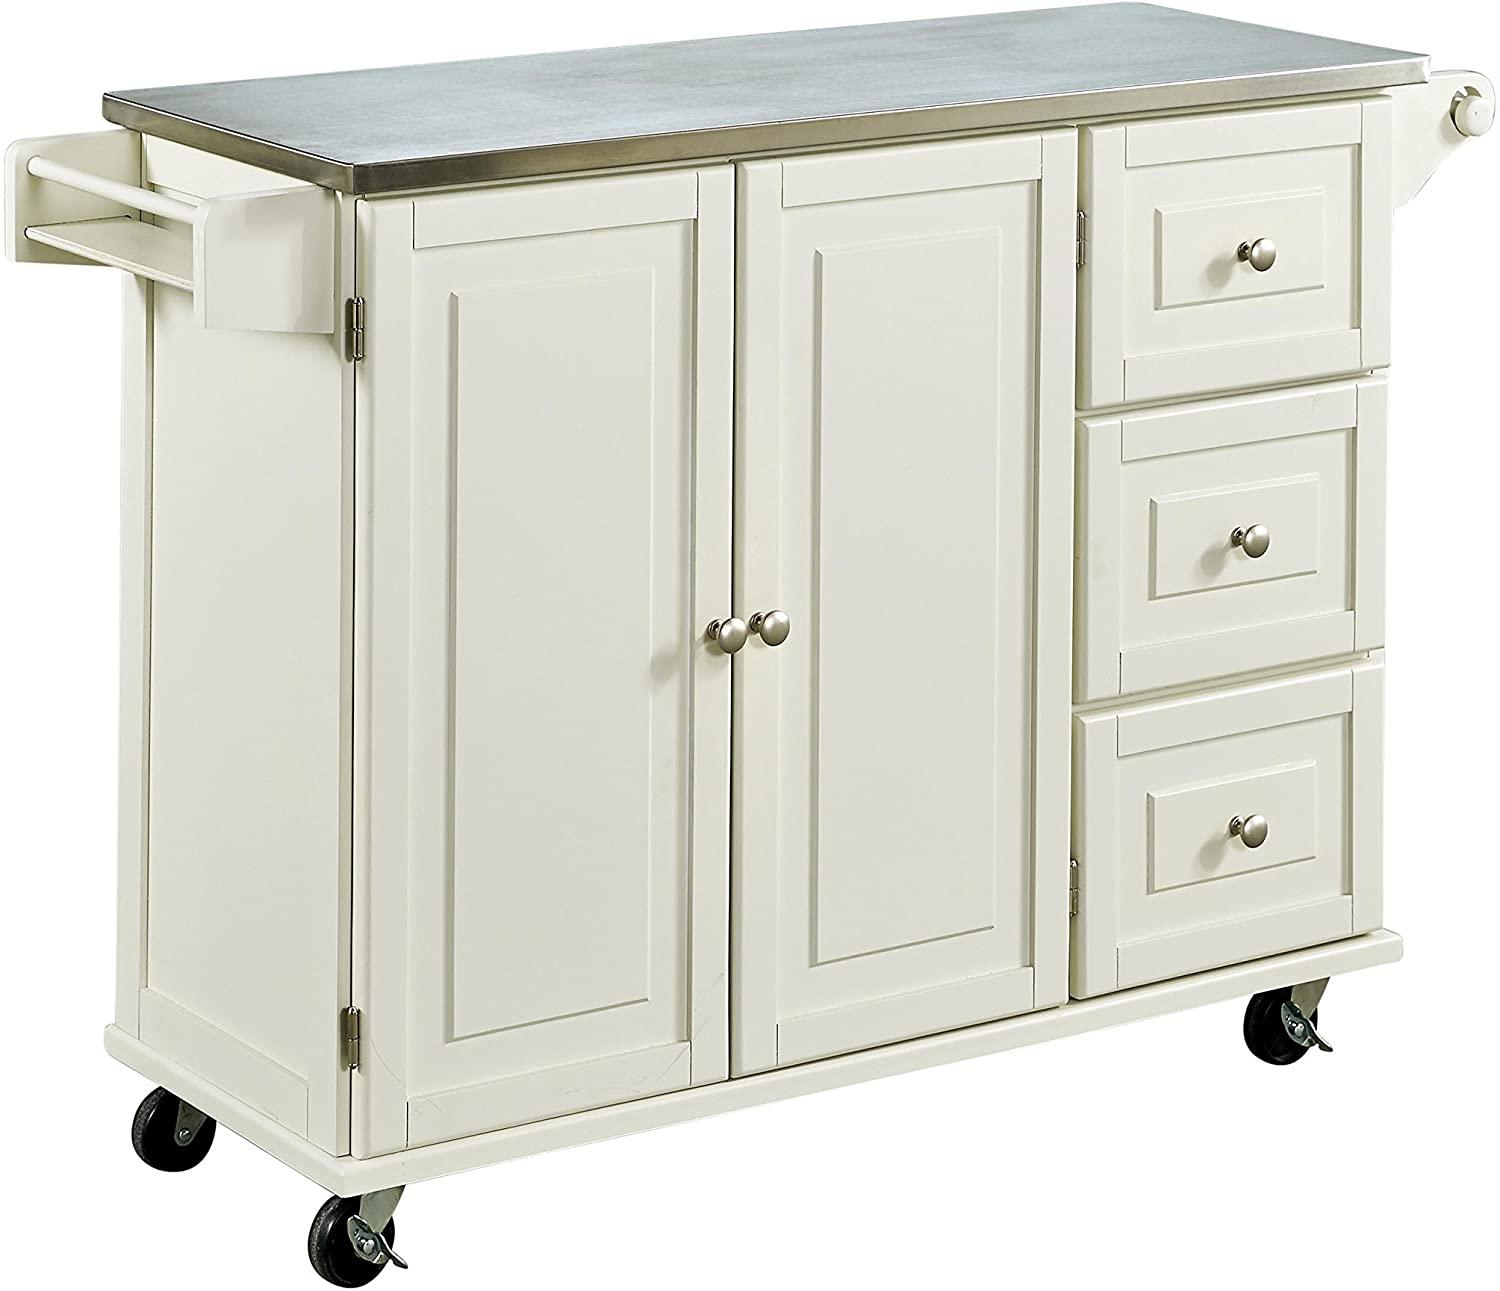 Home Styles Liberty Kitchen Cart with Stainless Steel Top for $208.13 Shipped